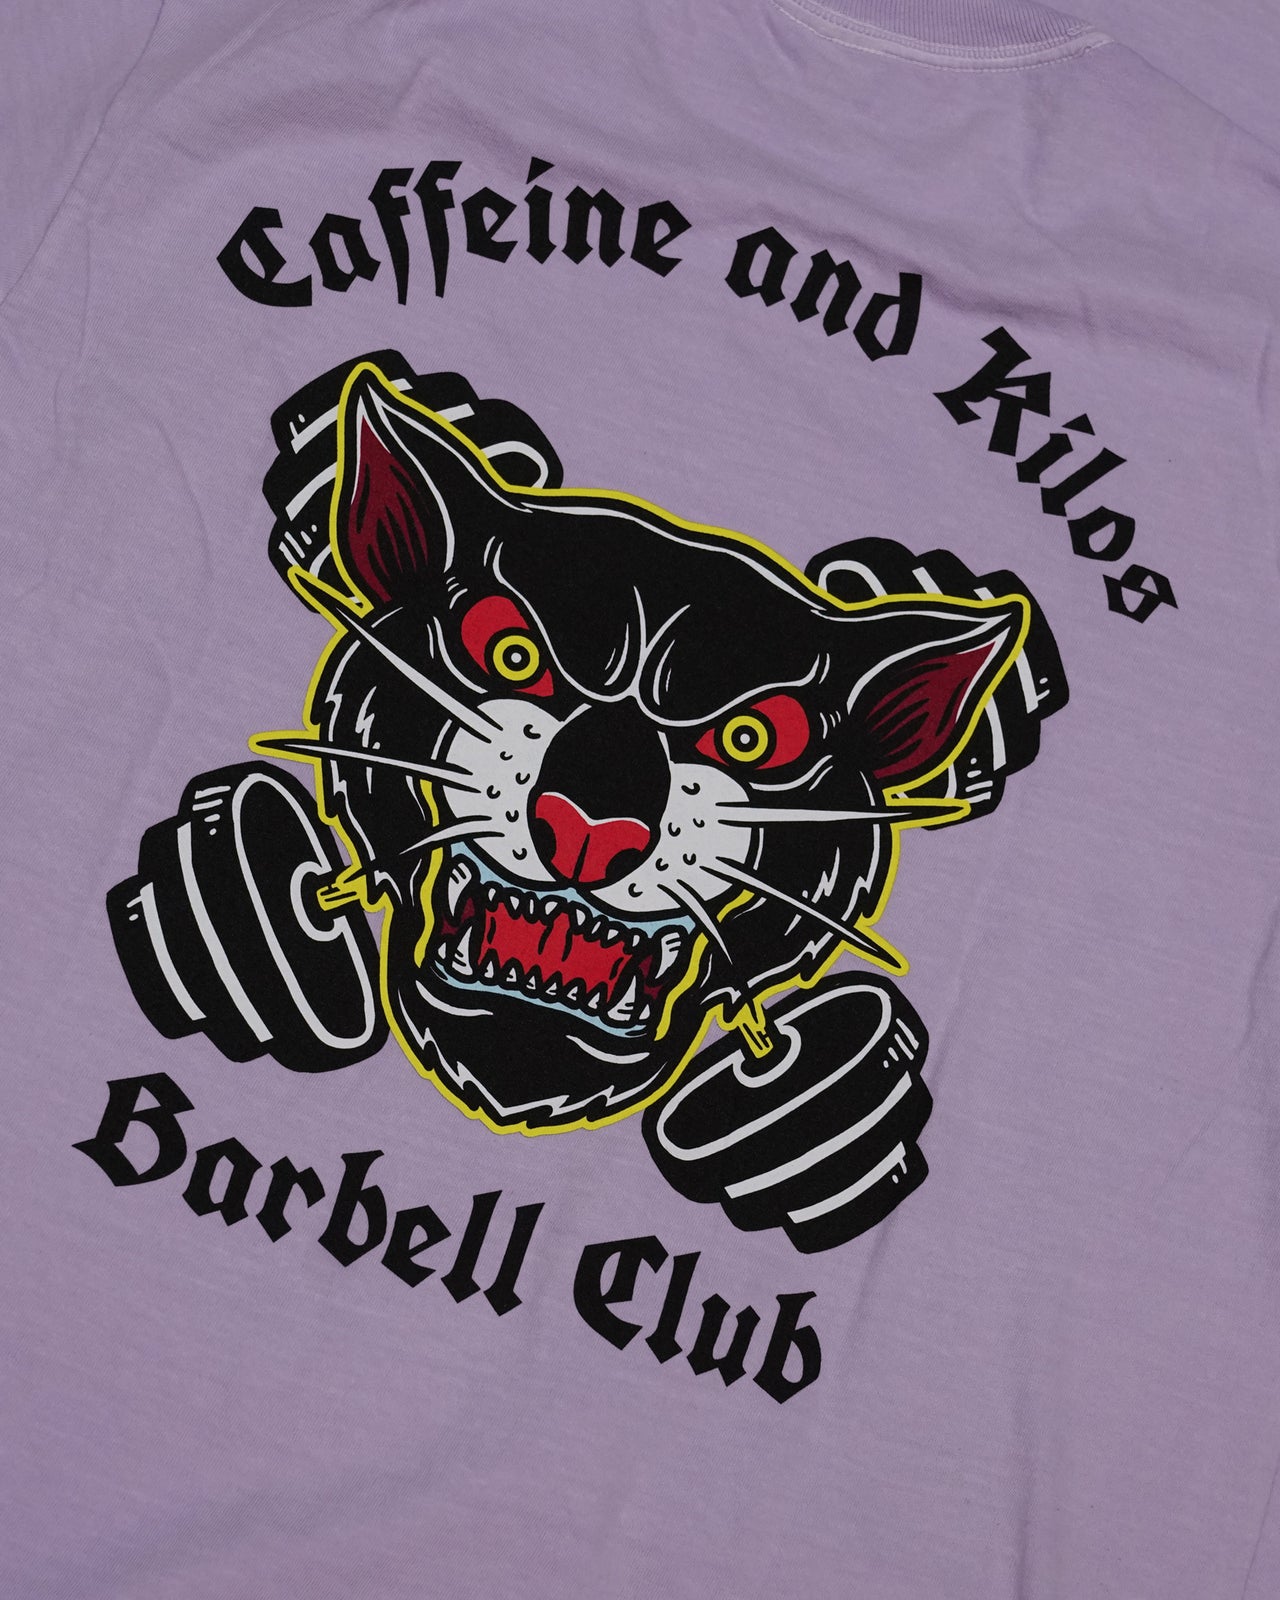 Panther Barbell Club Tee